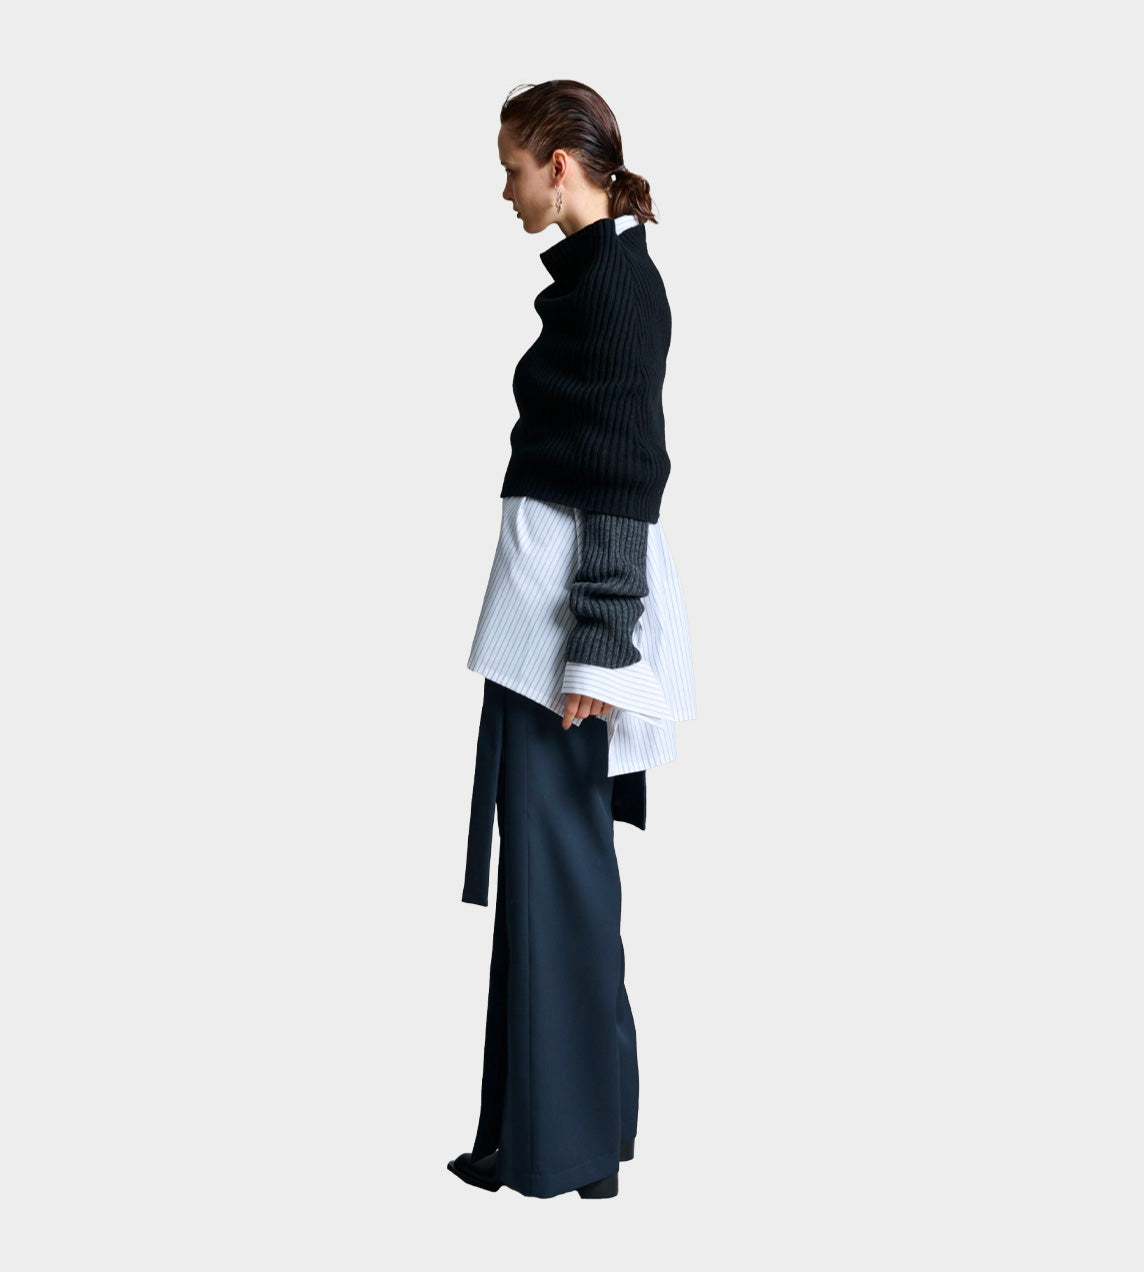 UJOH - Knit Shrug with Sleeves Black